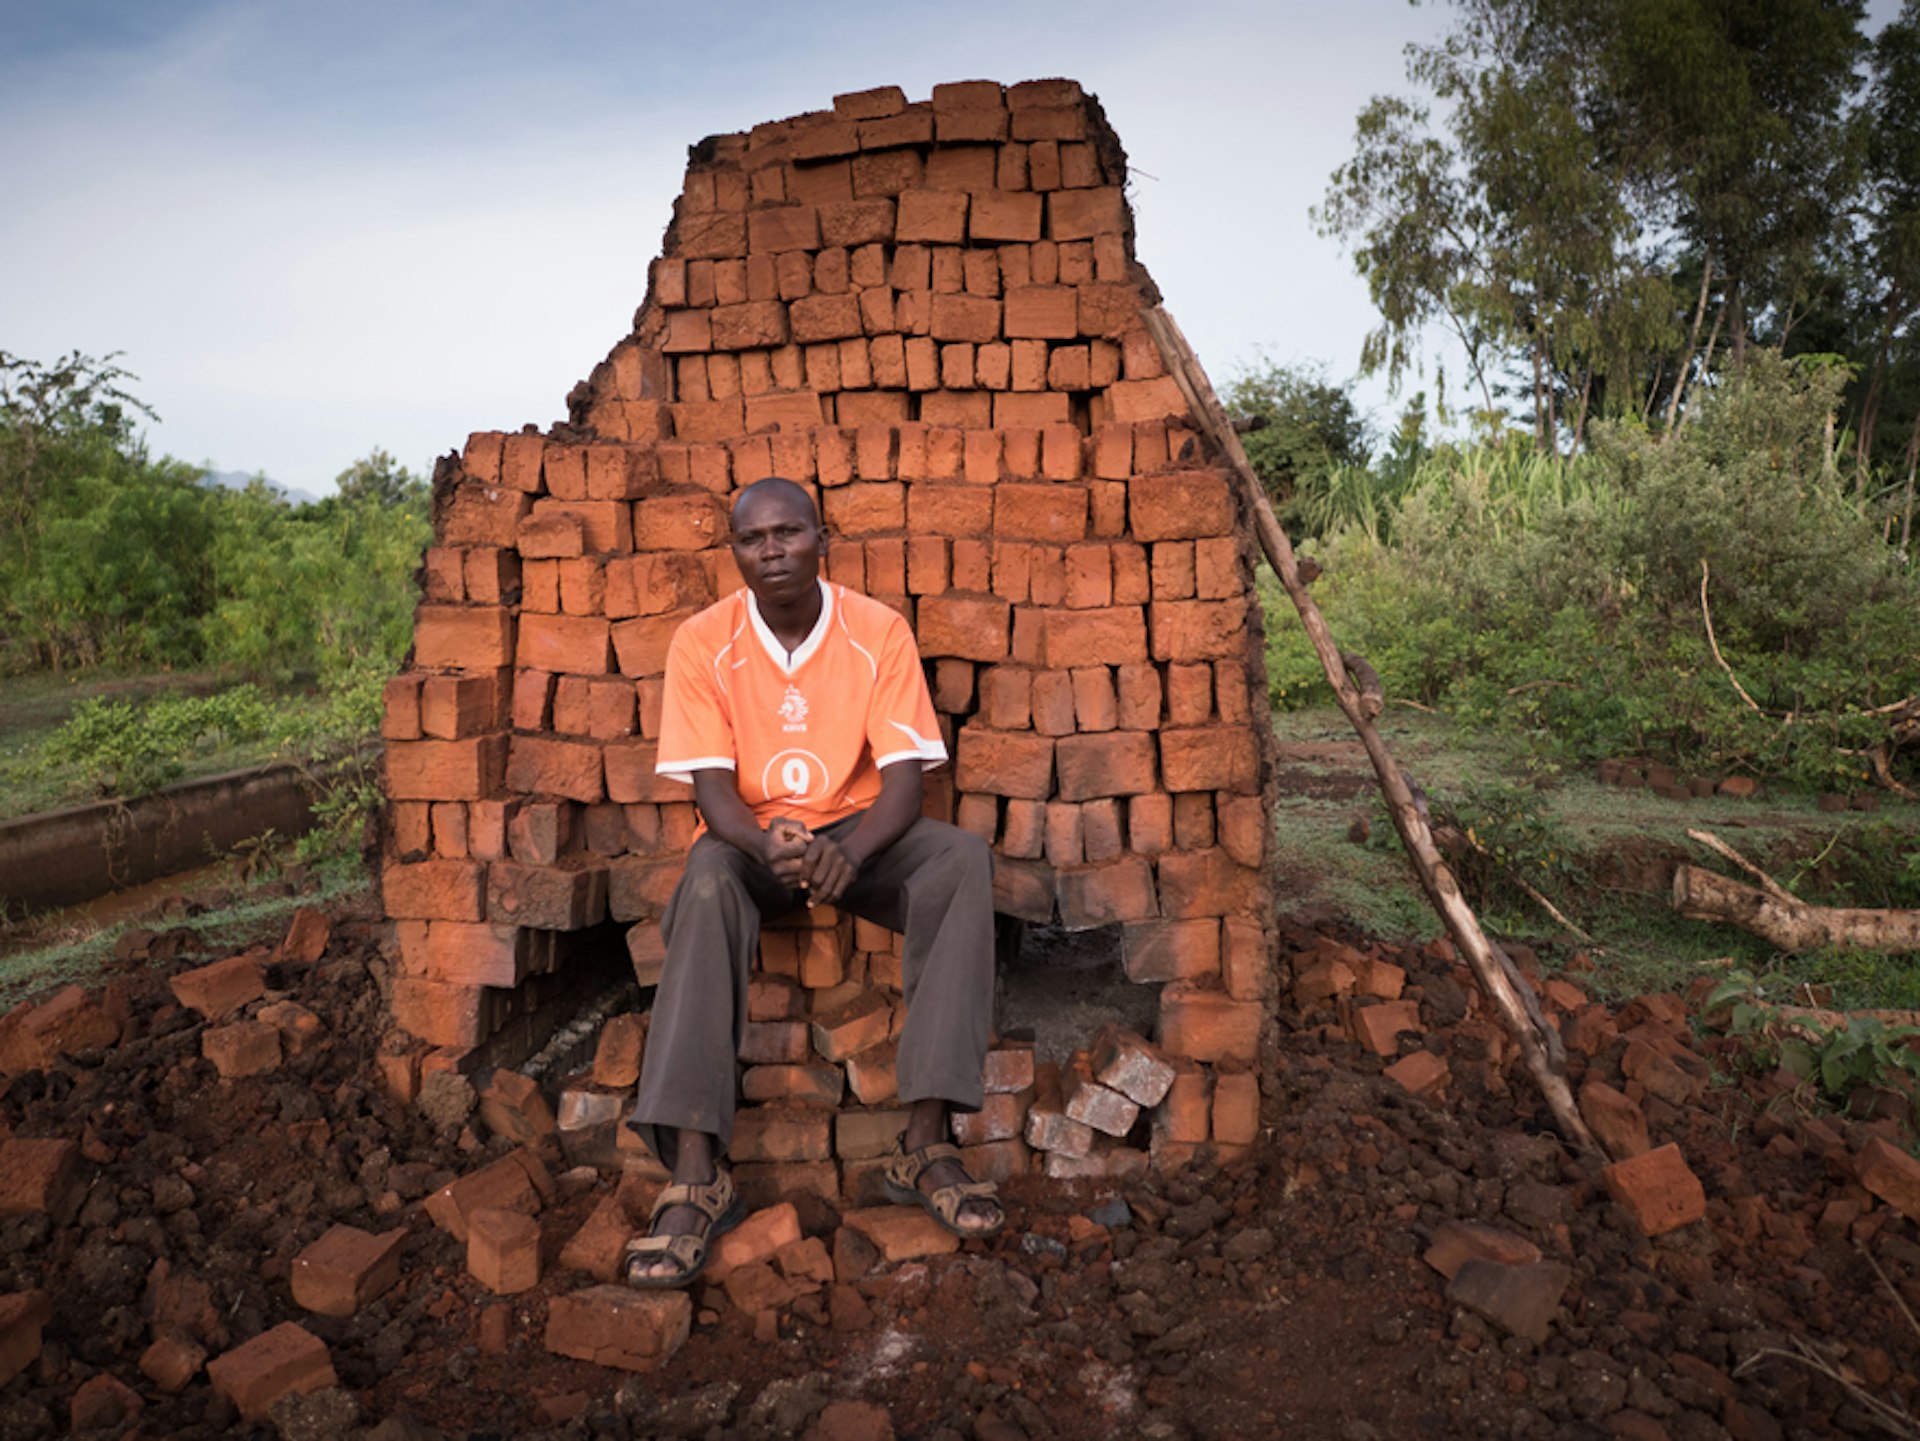 Kennedy Otieno Okuk, 35, brick burner. "After primary school I first became a fisherman, like most of the men here at Lake Victoria. Later, my brother took me to Eldoret. He‘s got a tailor‘s shop there. In the city I met someone who was burning bricks. I‘d never seen anything like it. He had a lot of business and was a respected man. I was impressed by that, so I studied his technique and went back to my village, where nobody knew anything about bricks. There is enough clay on my piece of land, so it doesn’t cost me anything. The only thing I have to buy is the firewood. Burning bricks has changed my life. Without it, I would be like everyone else."